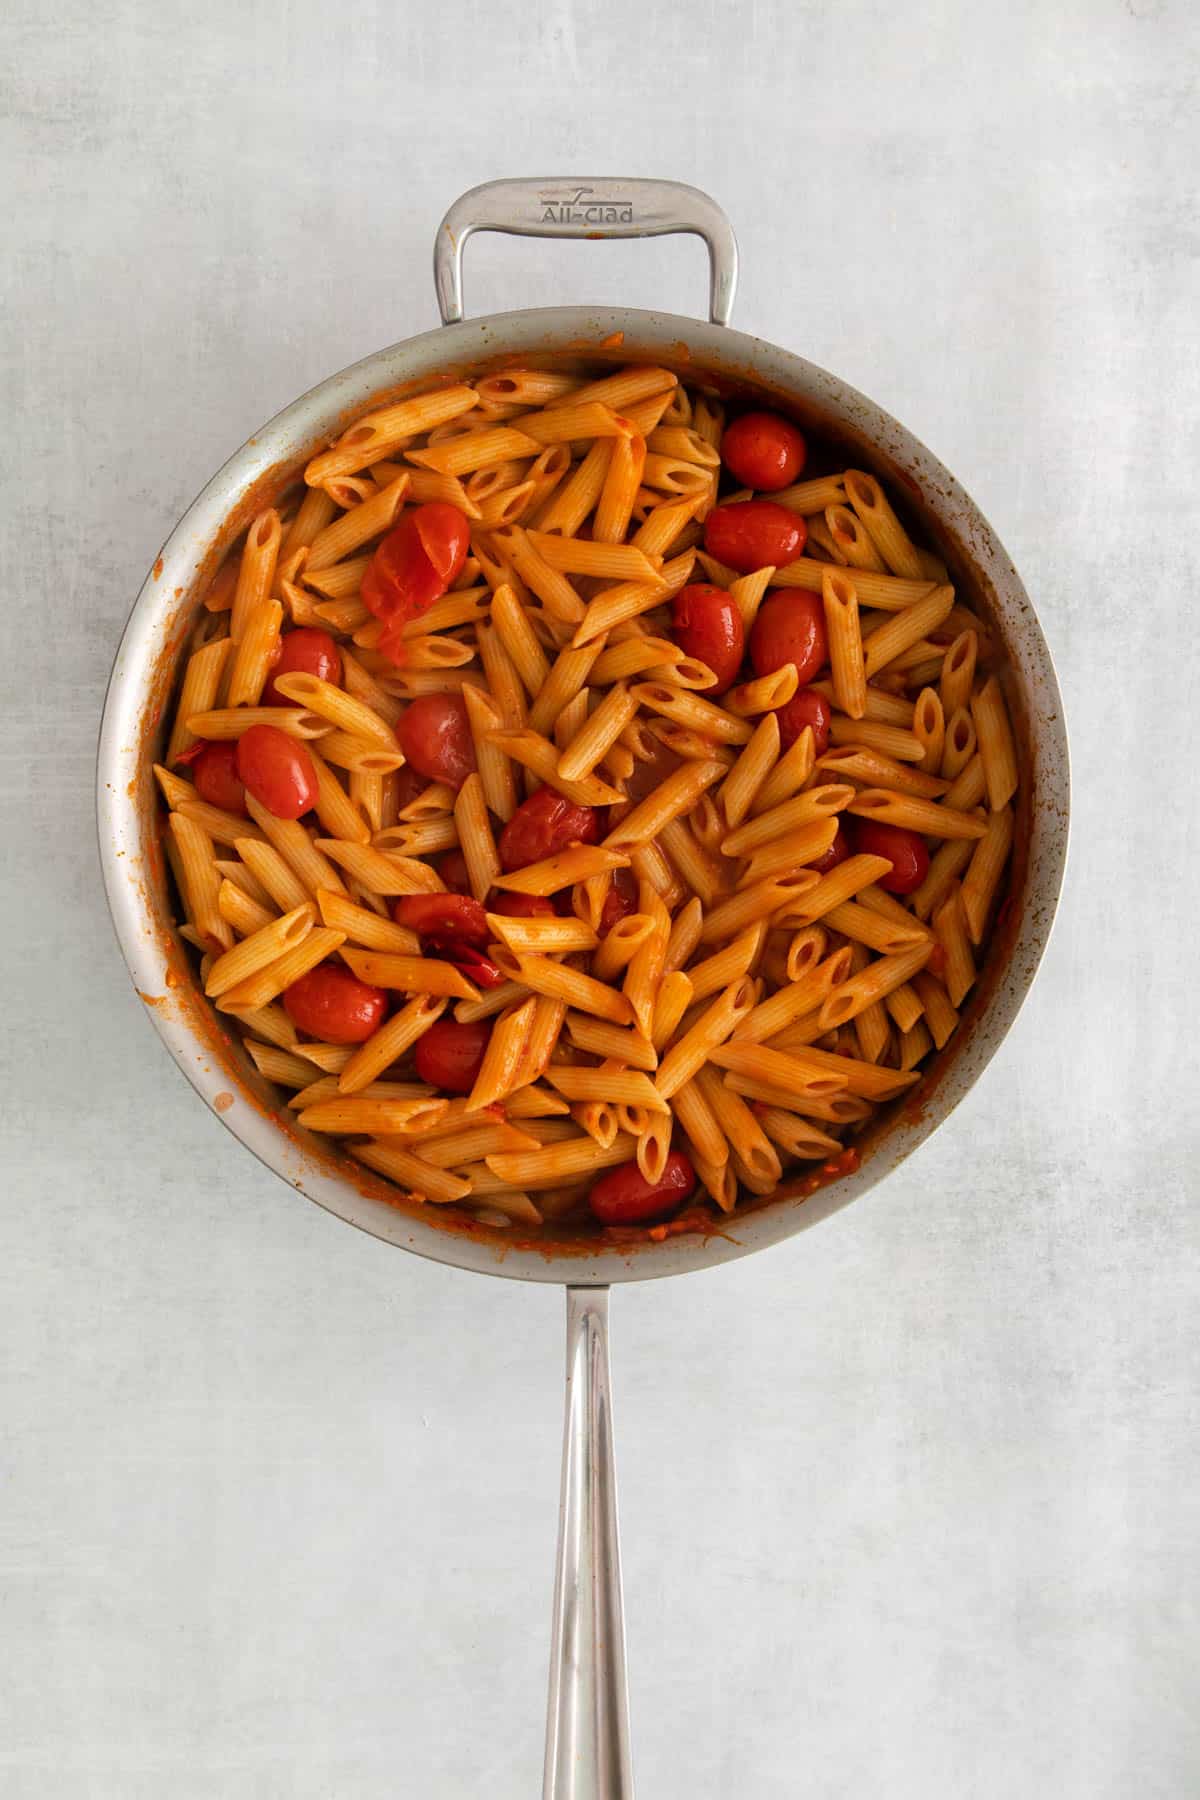 Cooked penne pasta tossed with arrabbiata sauce in a large pan.